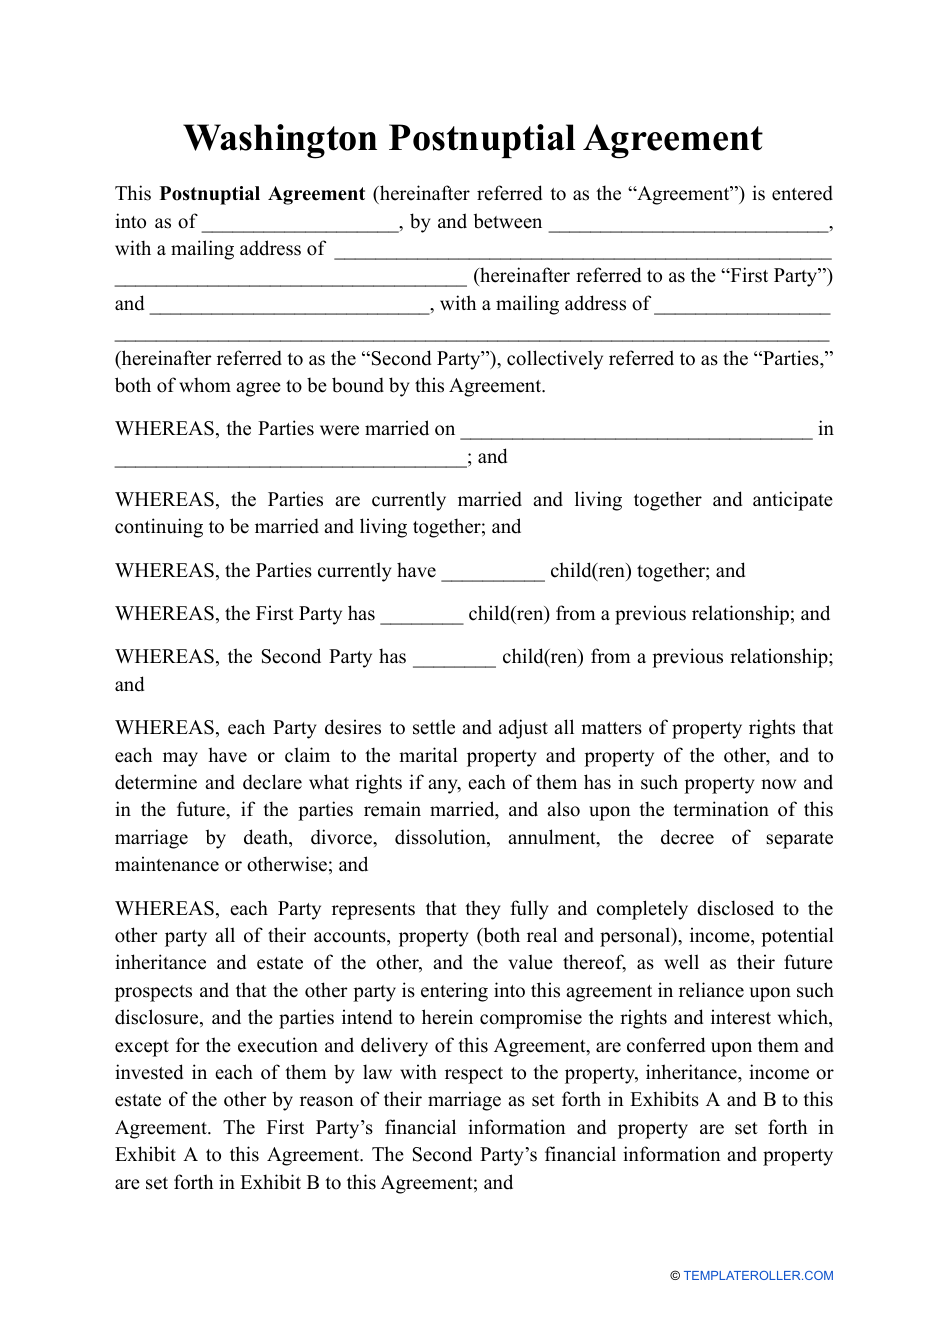 Washington Postnuptial Agreement Template Fill Out Sign Online and